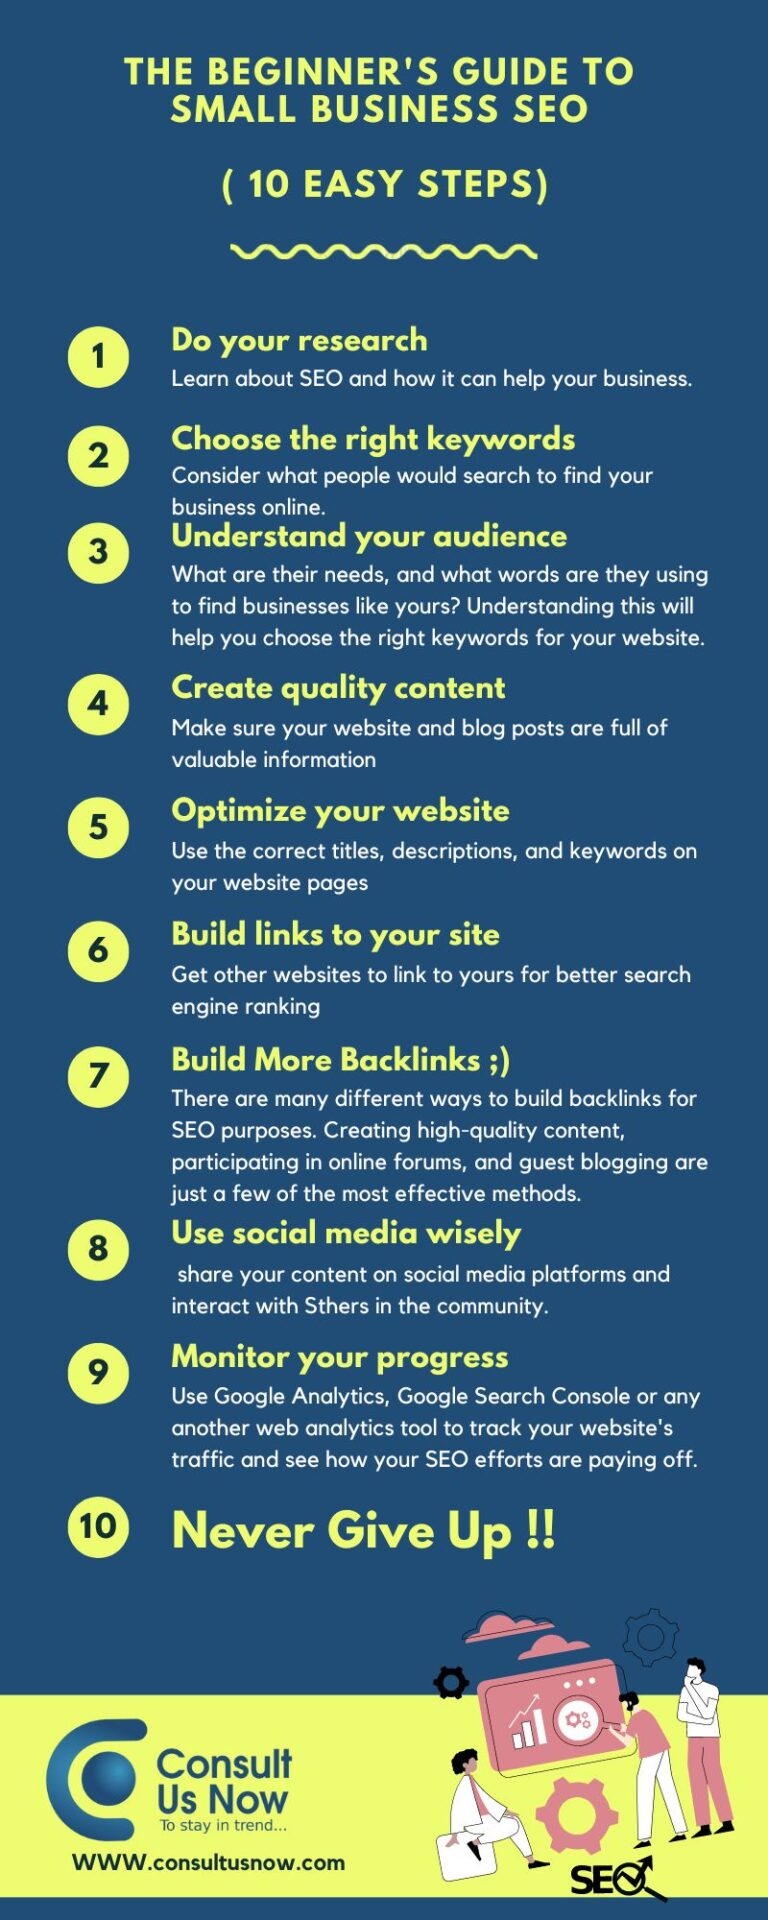 10 Steps Infographic for Small Business SEO